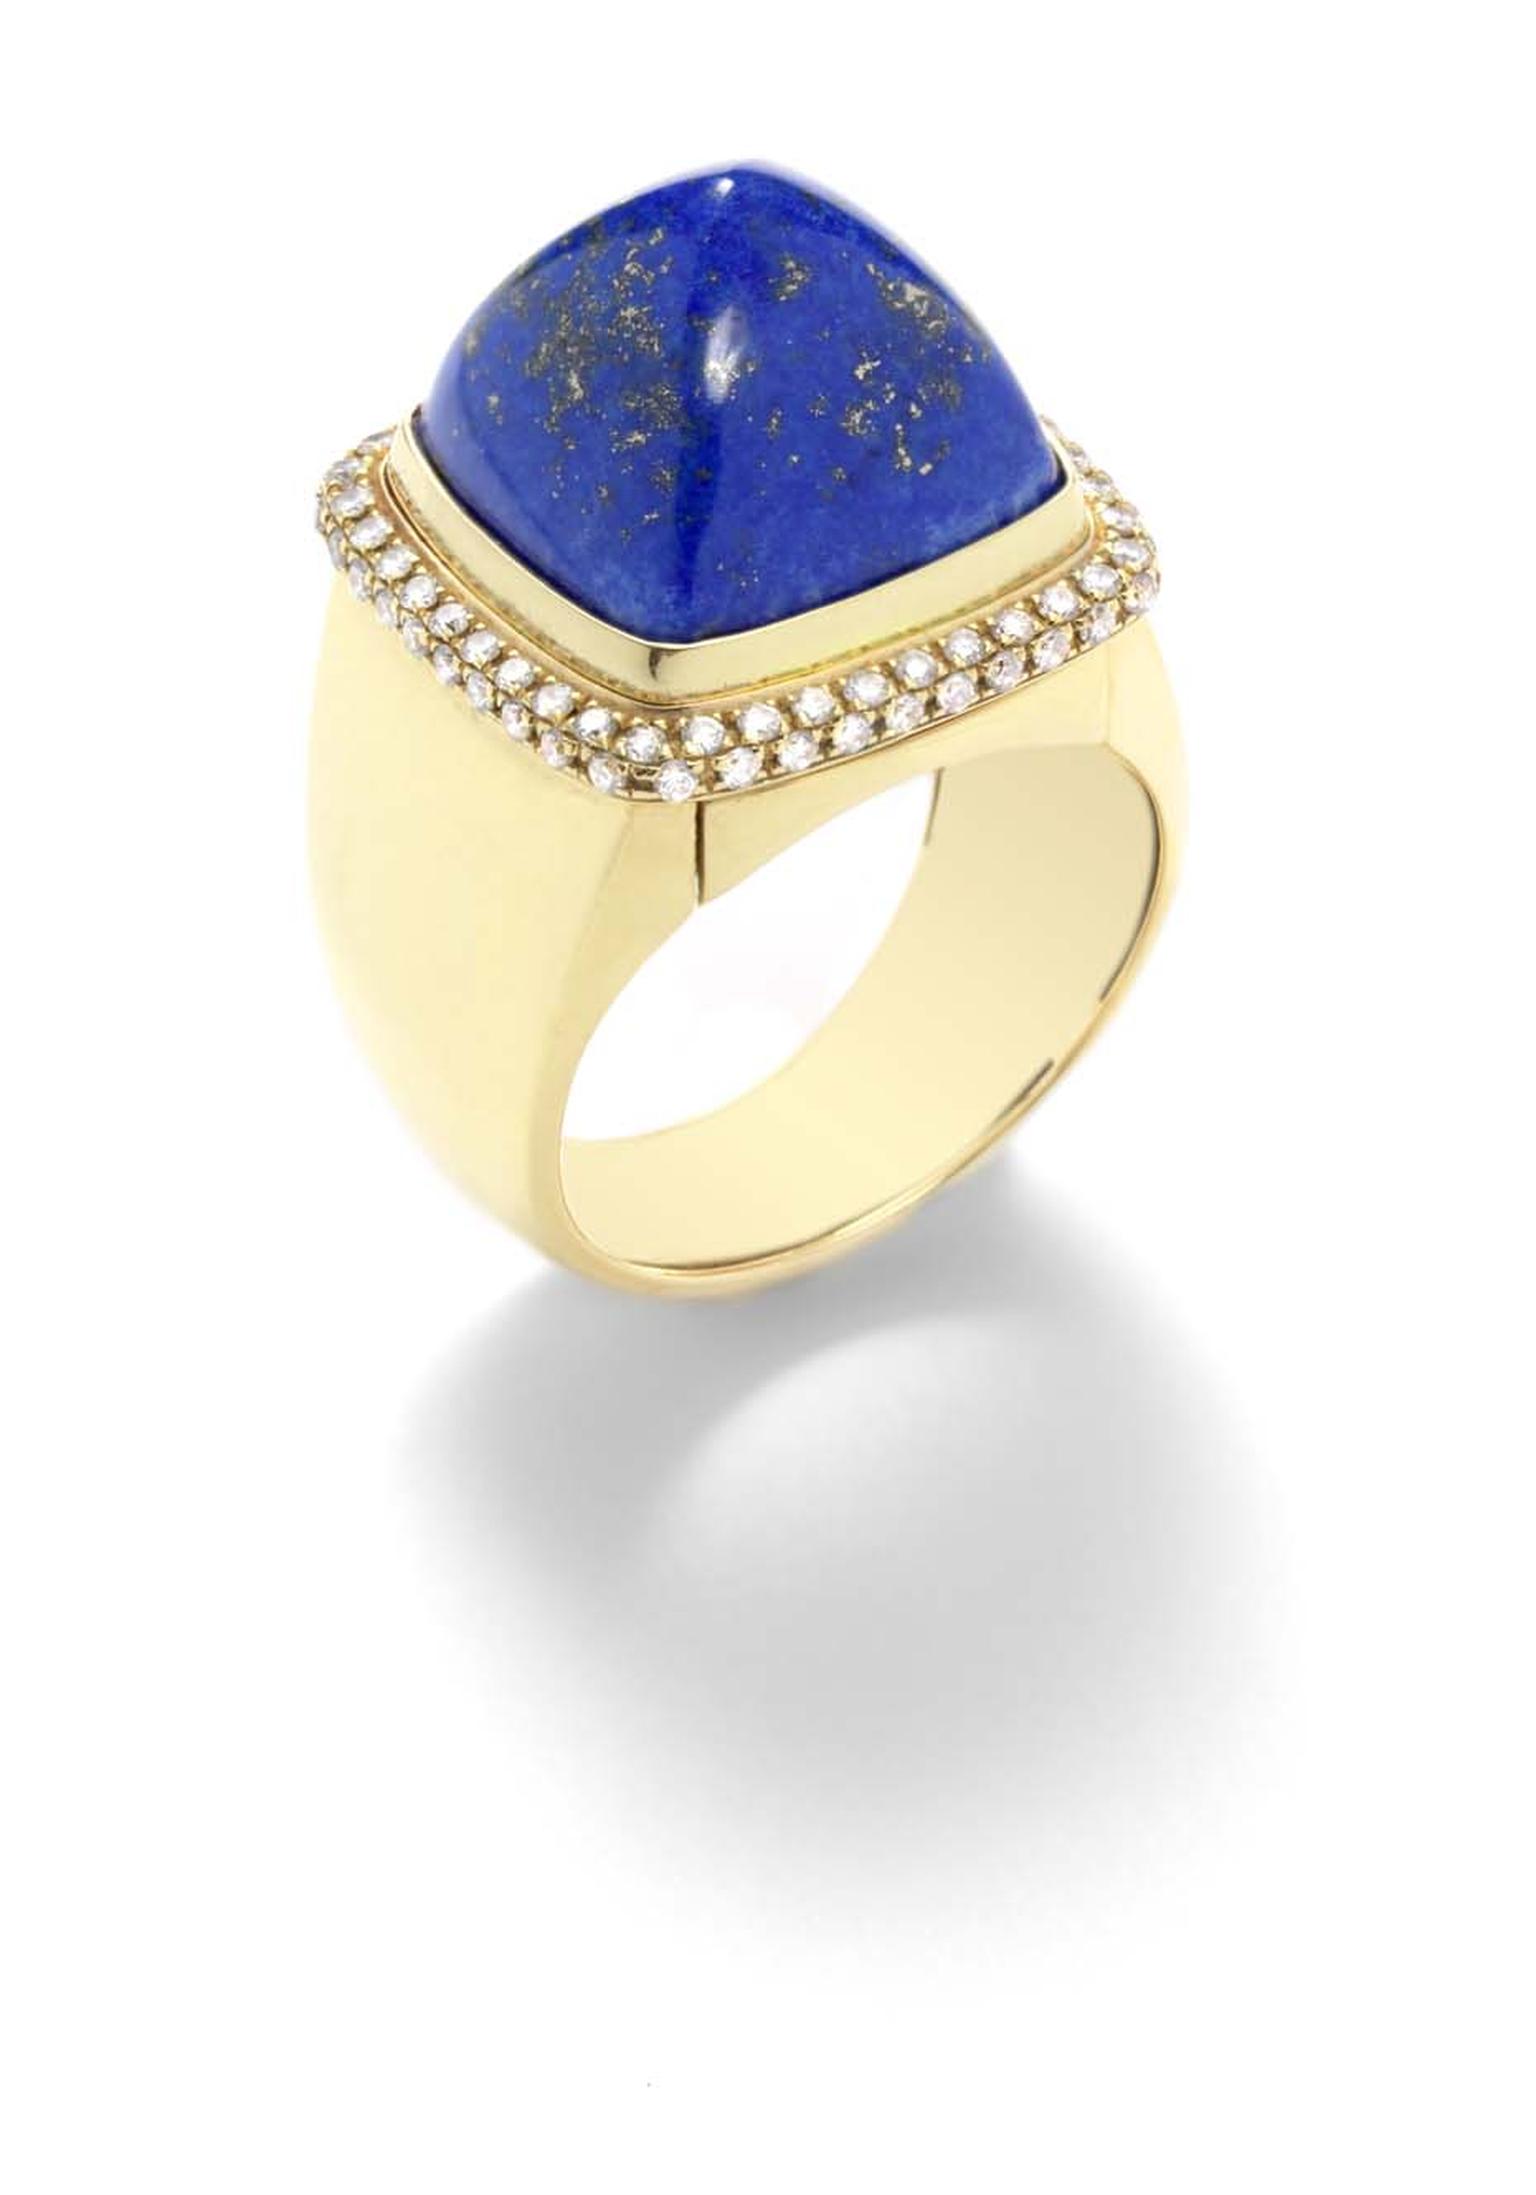 FRED Pain de Sucre ring in gold and diamonds, with an interchangeable cabochon lapis lazuli.